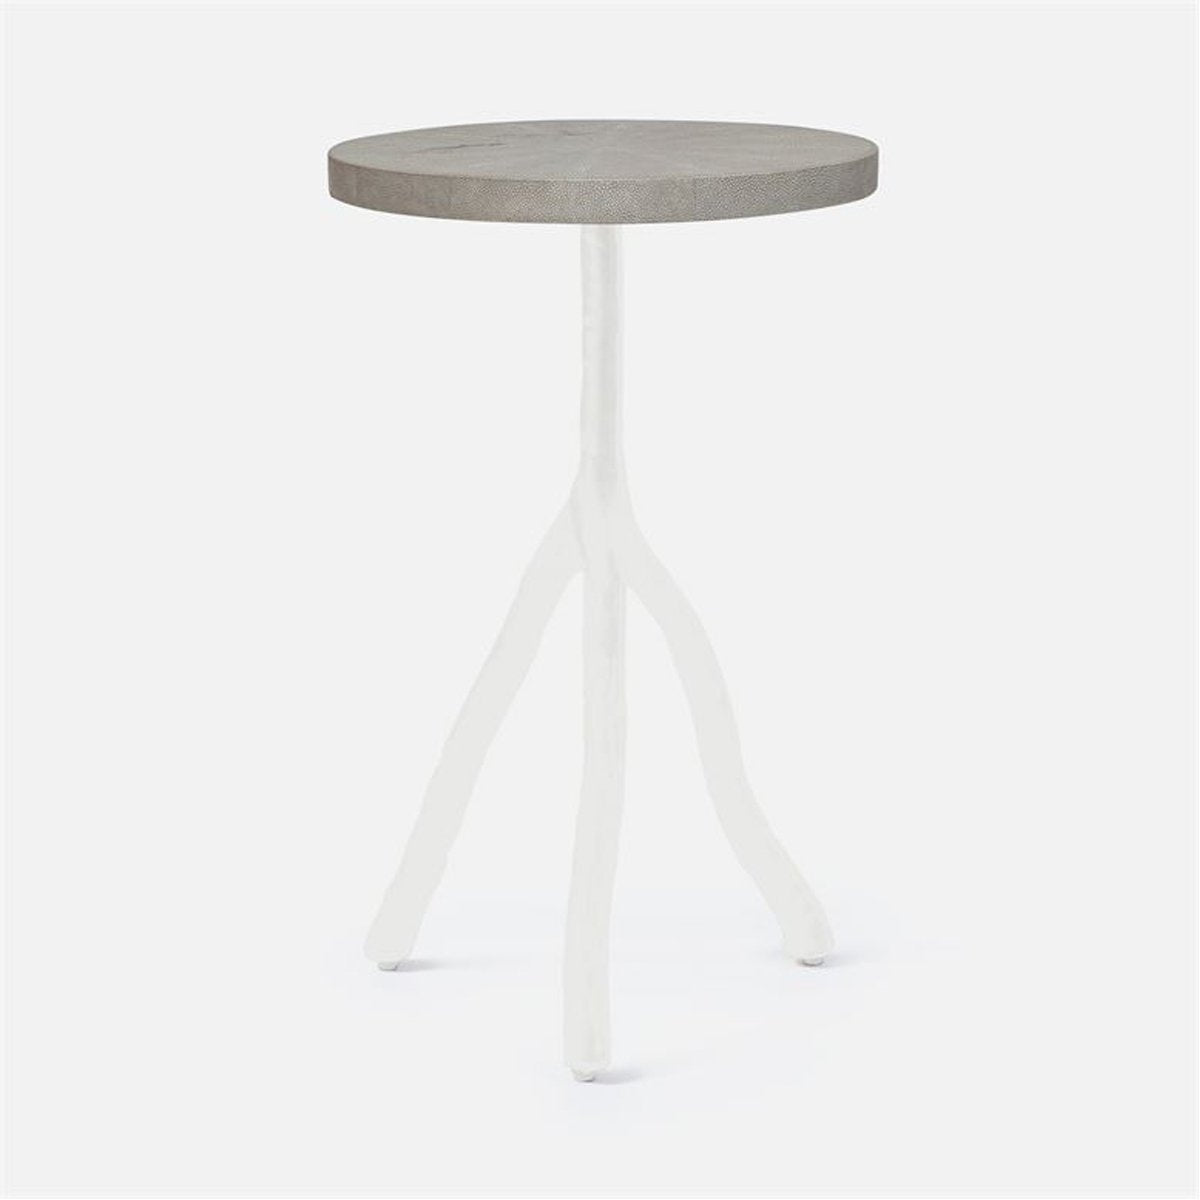 Made Goods Royce Abstract Branch 16-Inch Accent Table in Faux Shagreen